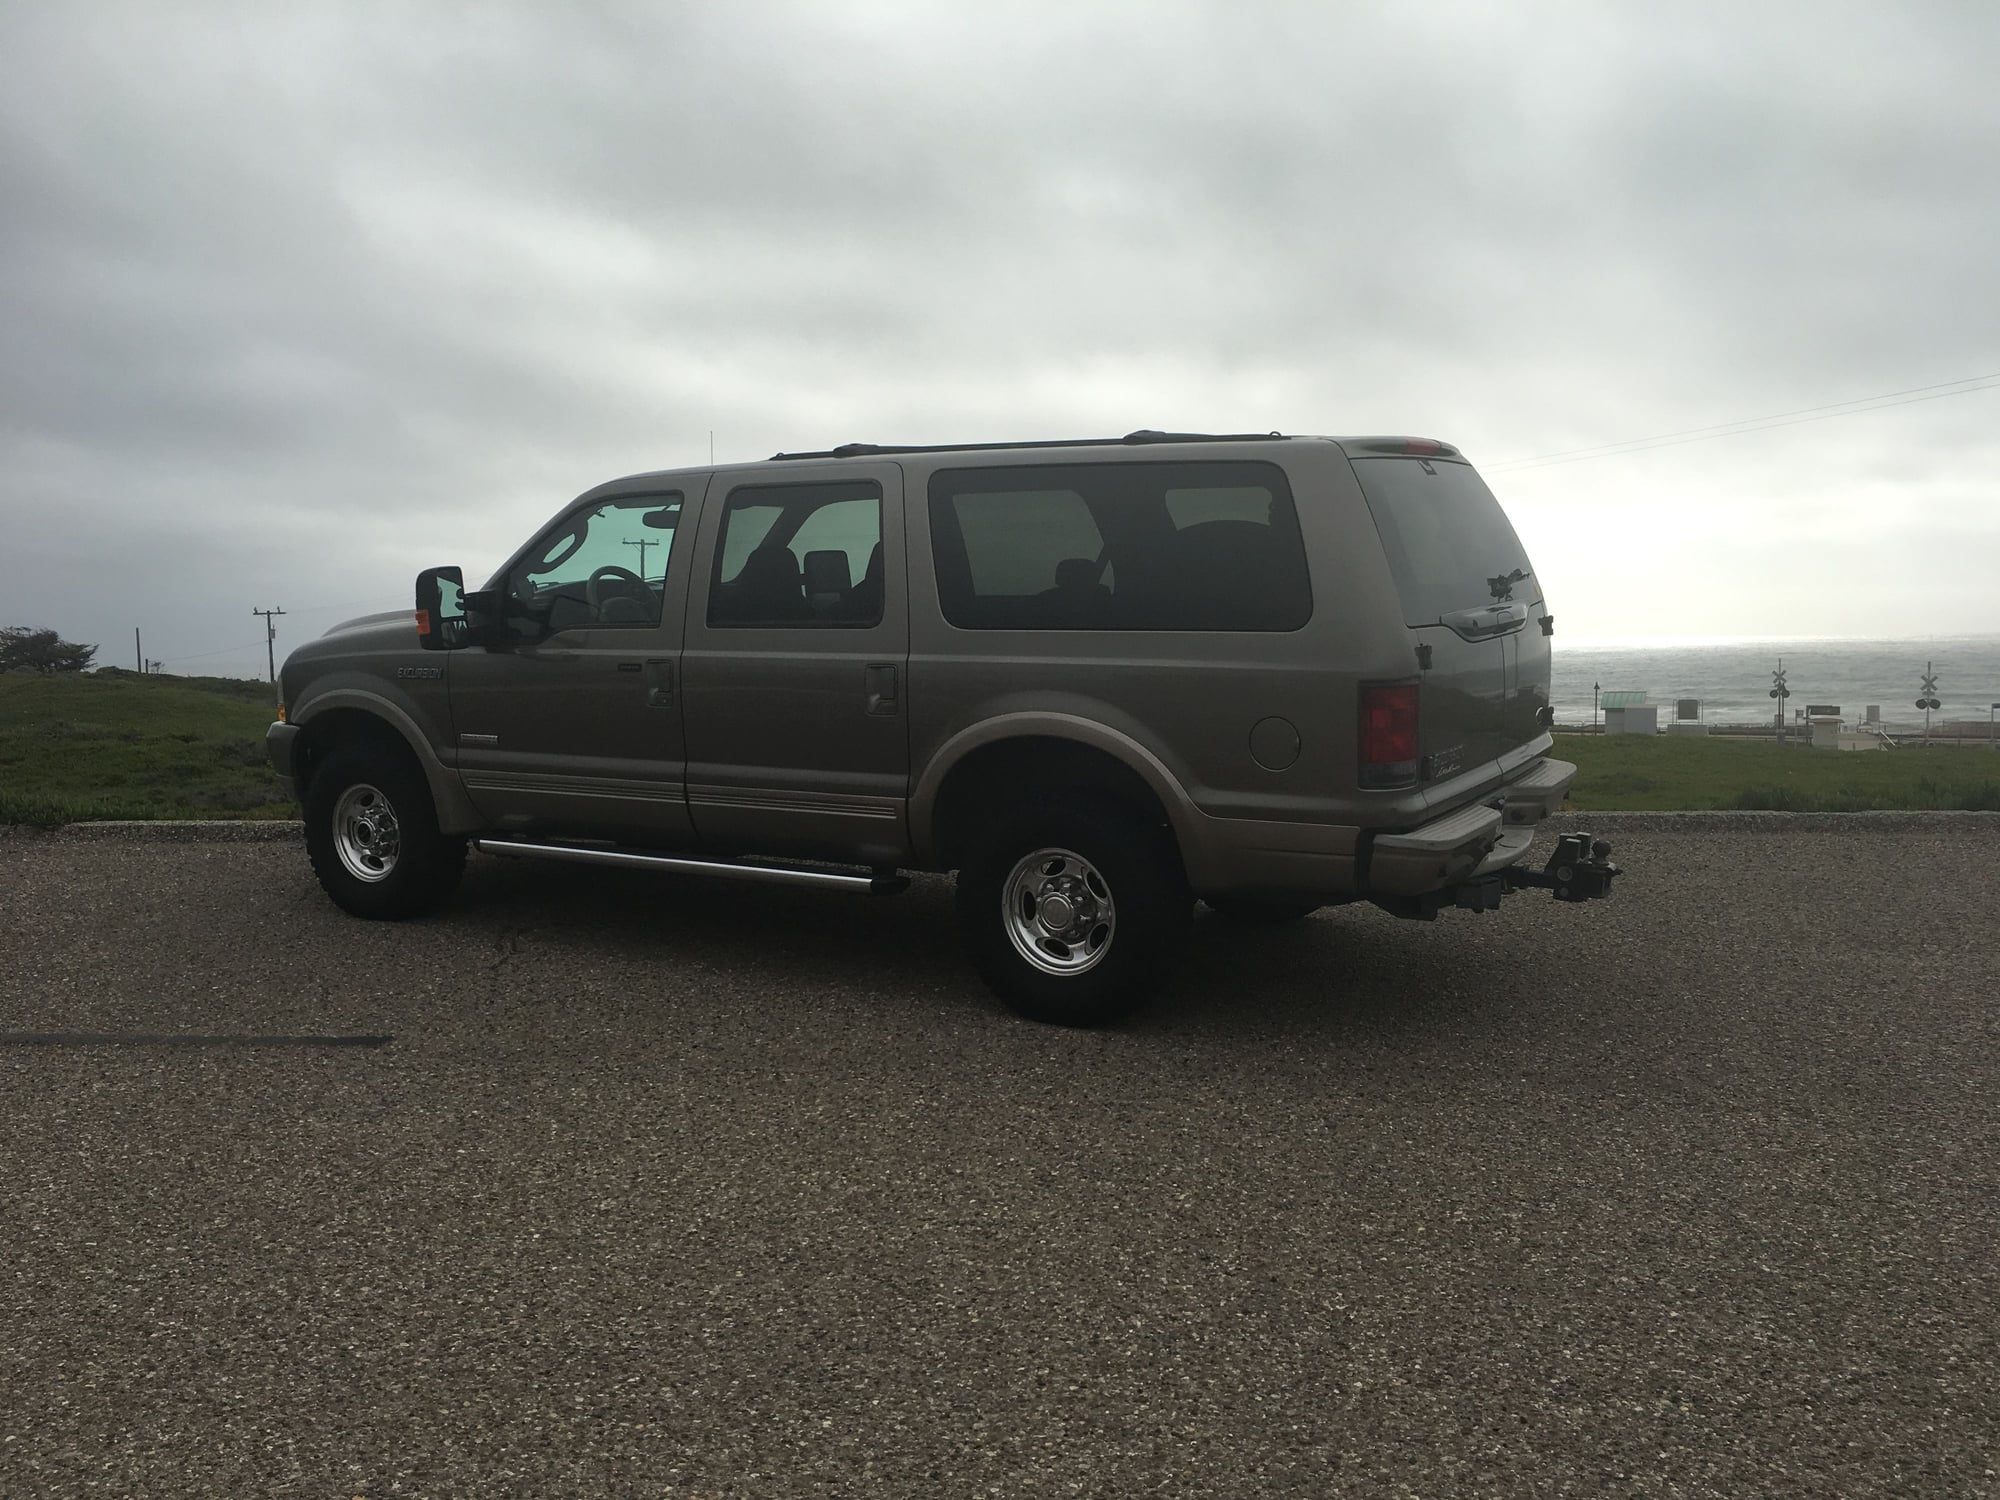 2004 Ford Excursion - 2004 Excursion Limited Diesel 150,000 miles - Used - VIN 1FMSU45PX4ED76669 - 140,000 Miles - 8 cyl - 4WD - Automatic - SUV - Brown - Lompoc, CA 93436, United States